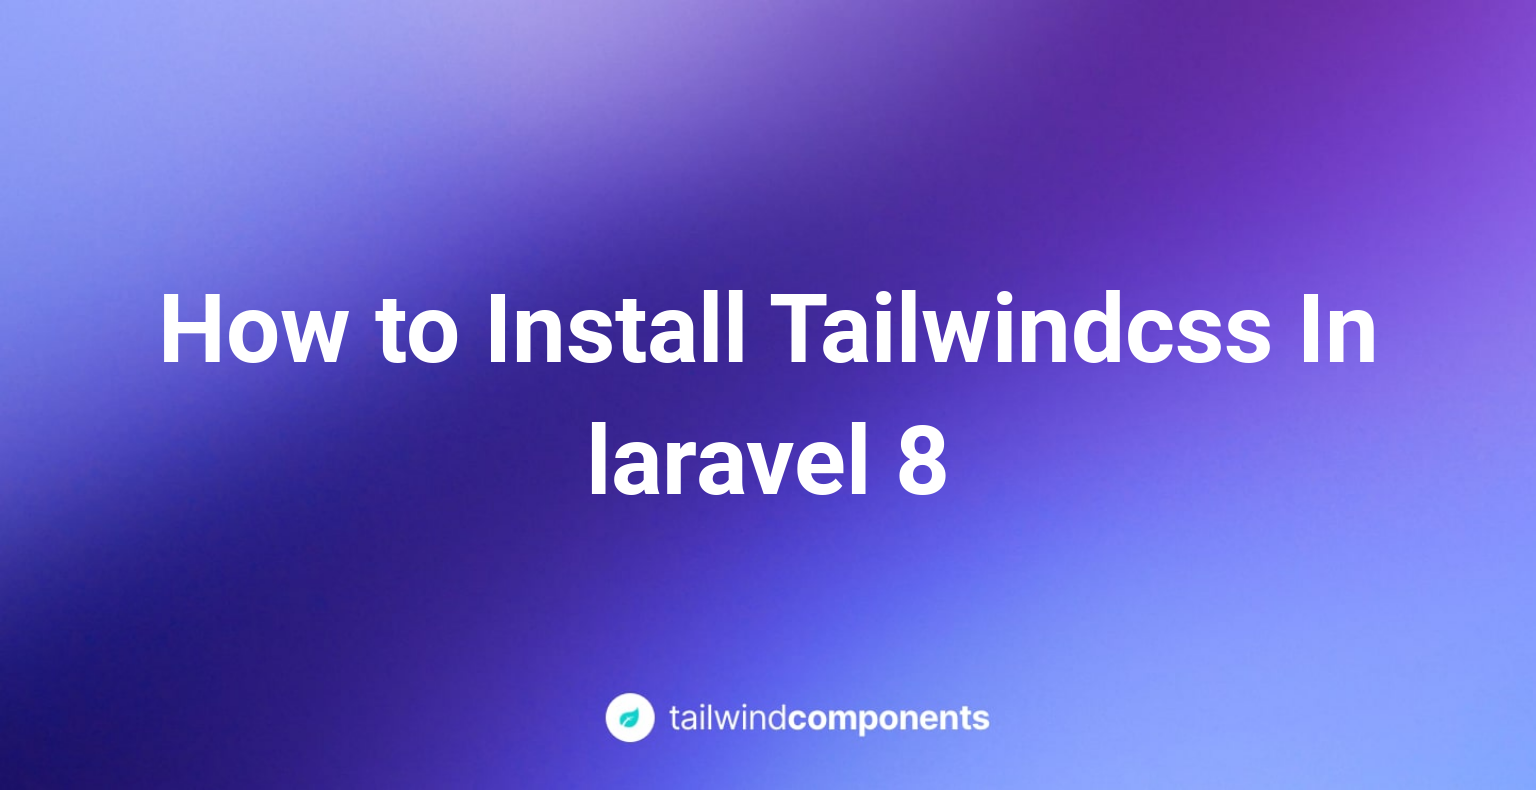 How to Install Tailwindcss In laravel 8 Image